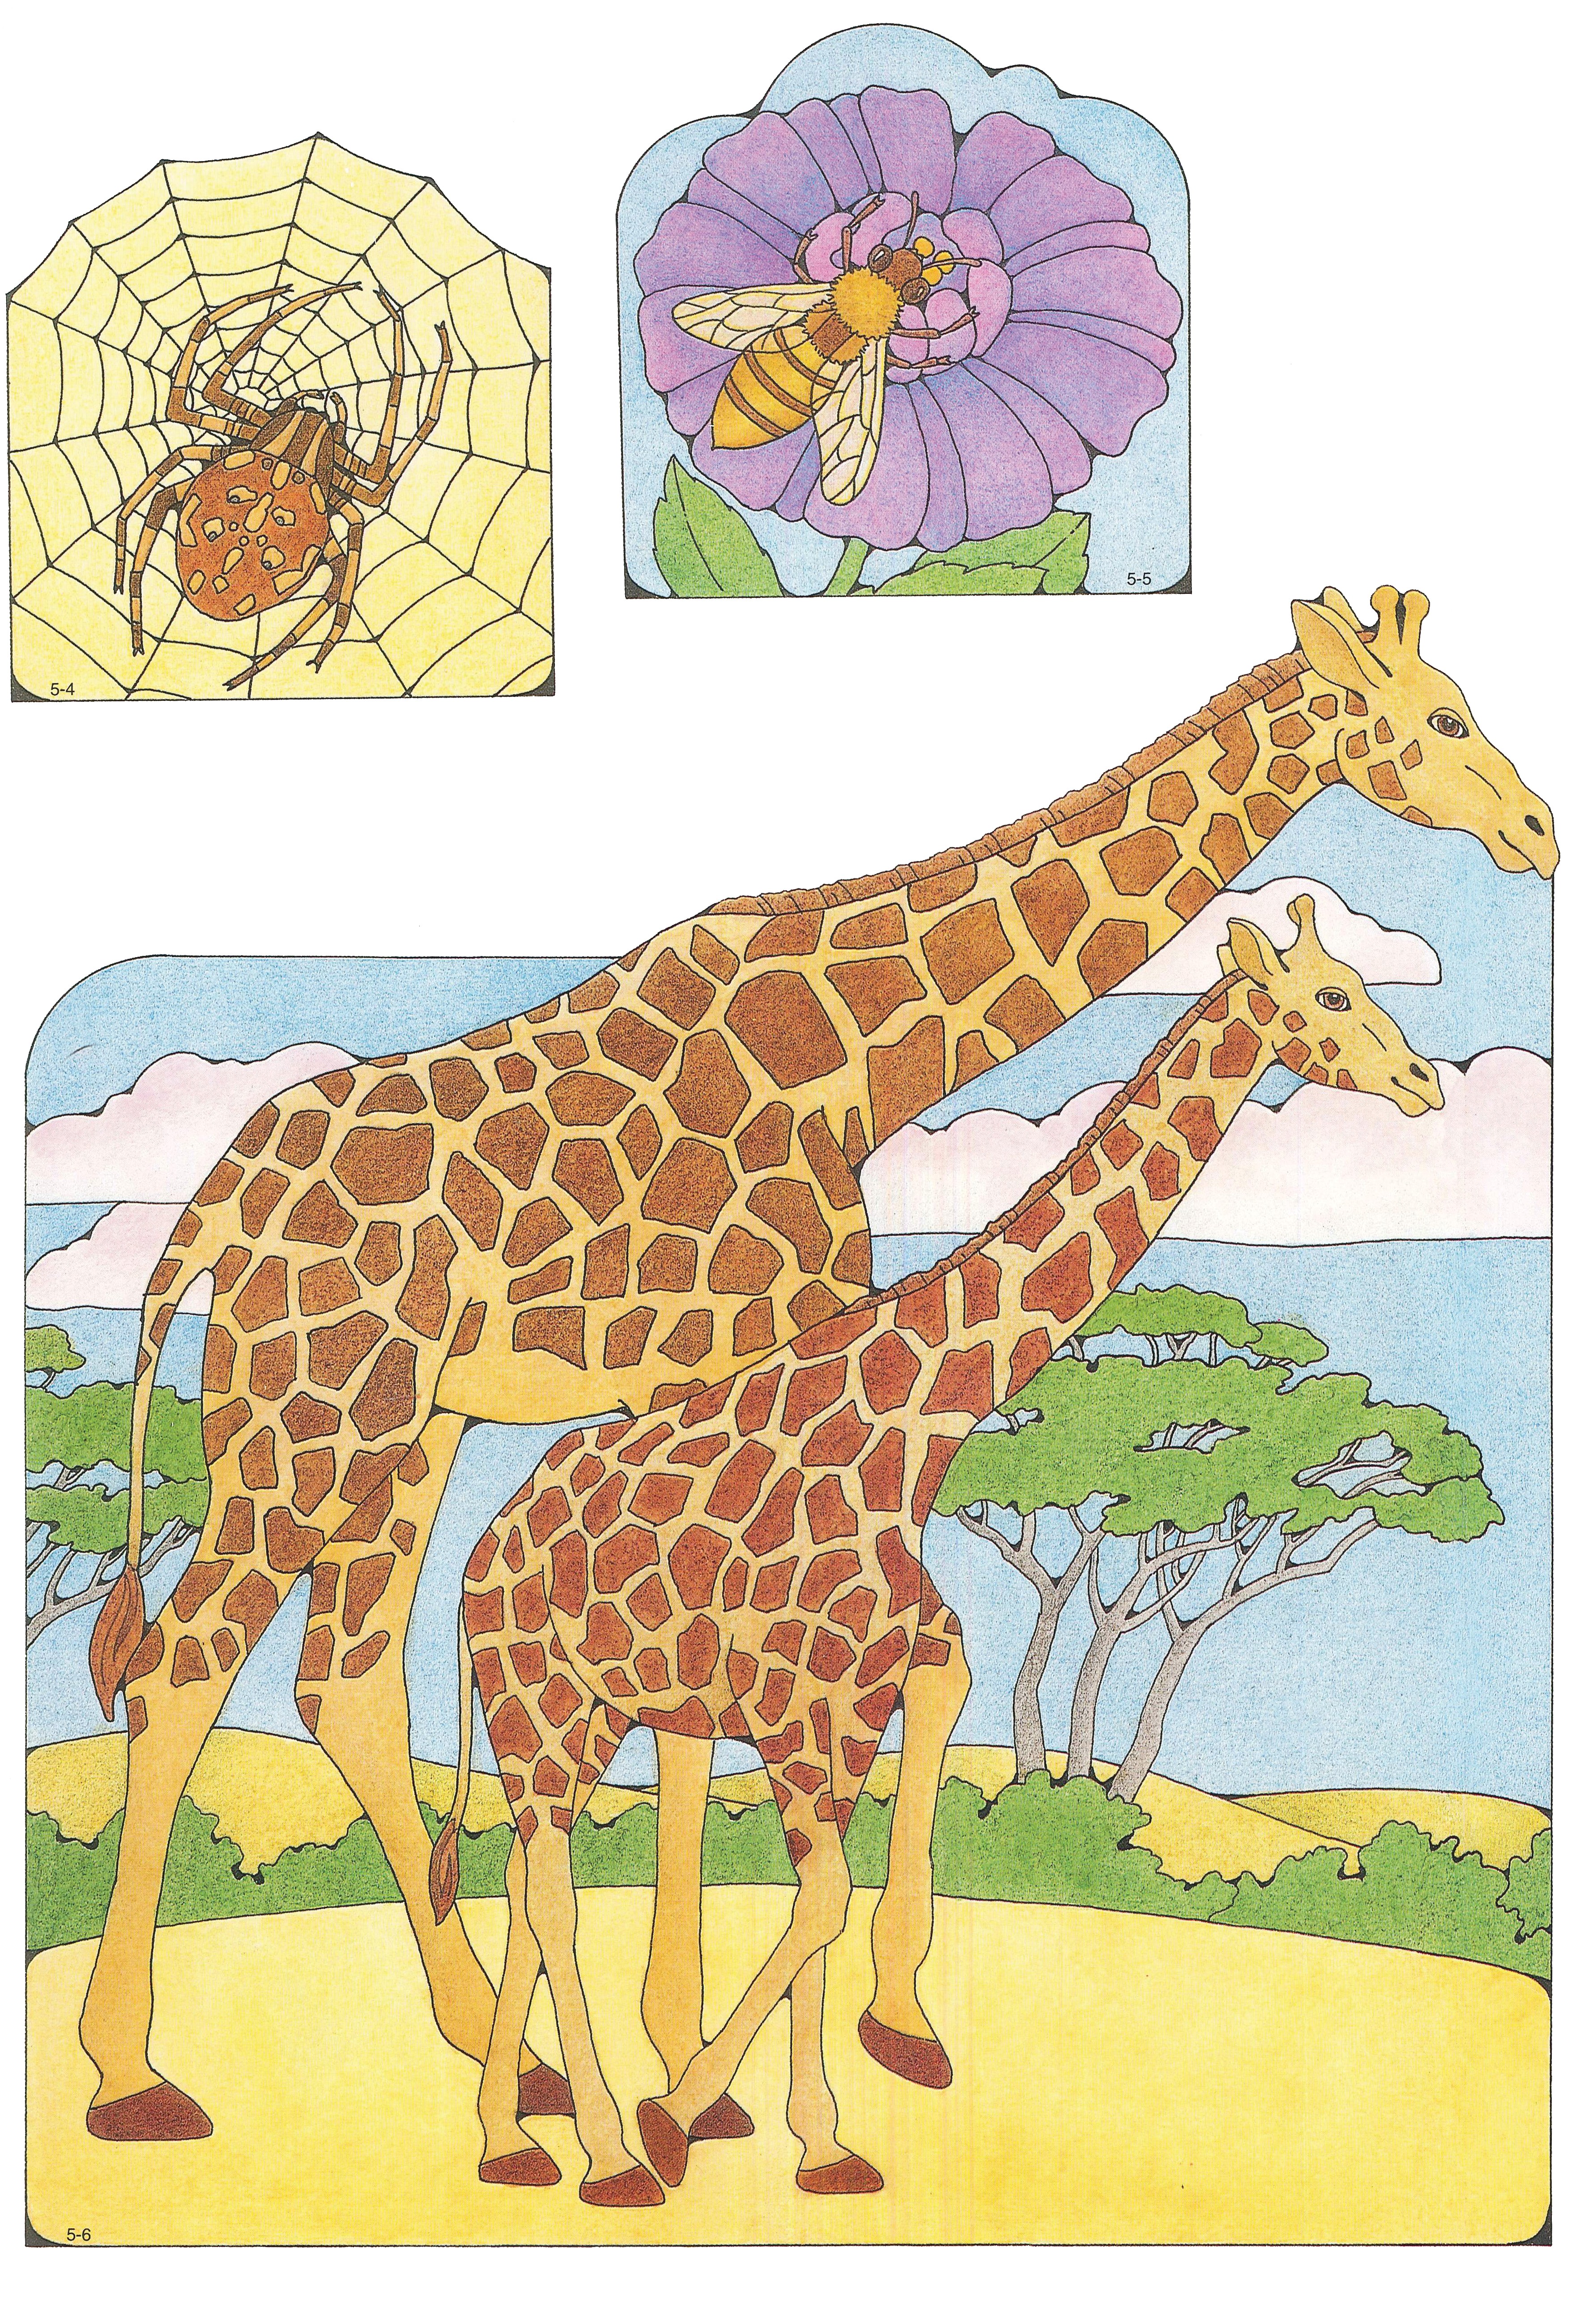 Primary cutouts of a brown spider on a spiderweb, a bee on a purple flower, and a mother giraffe walking with her baby.